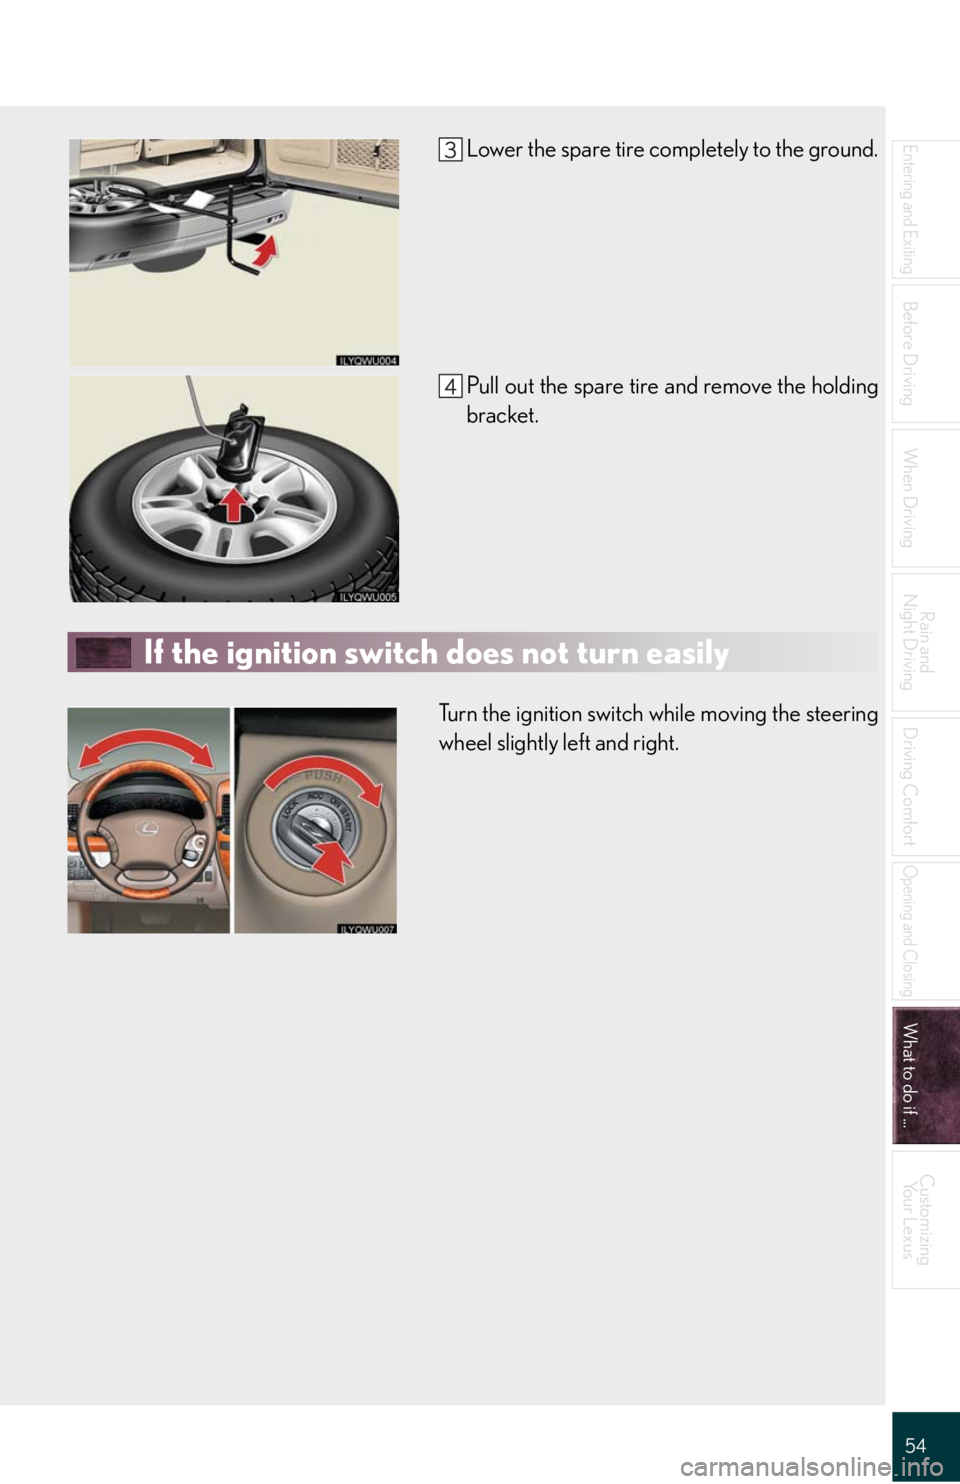 Lexus GX470 2008  Refueling / LEXUS 2008 GX470 QUICK GUIDE OWNERS MANUAL (OM60D81U) 54
Entering and Exiting
Before Driving
When Driving
Rain and 
Night Driving
Driving Comfort
Opening and Closing
What to do if ...
Customizing
Yo u r  L e x u s
Lower the spare tire completely to the g